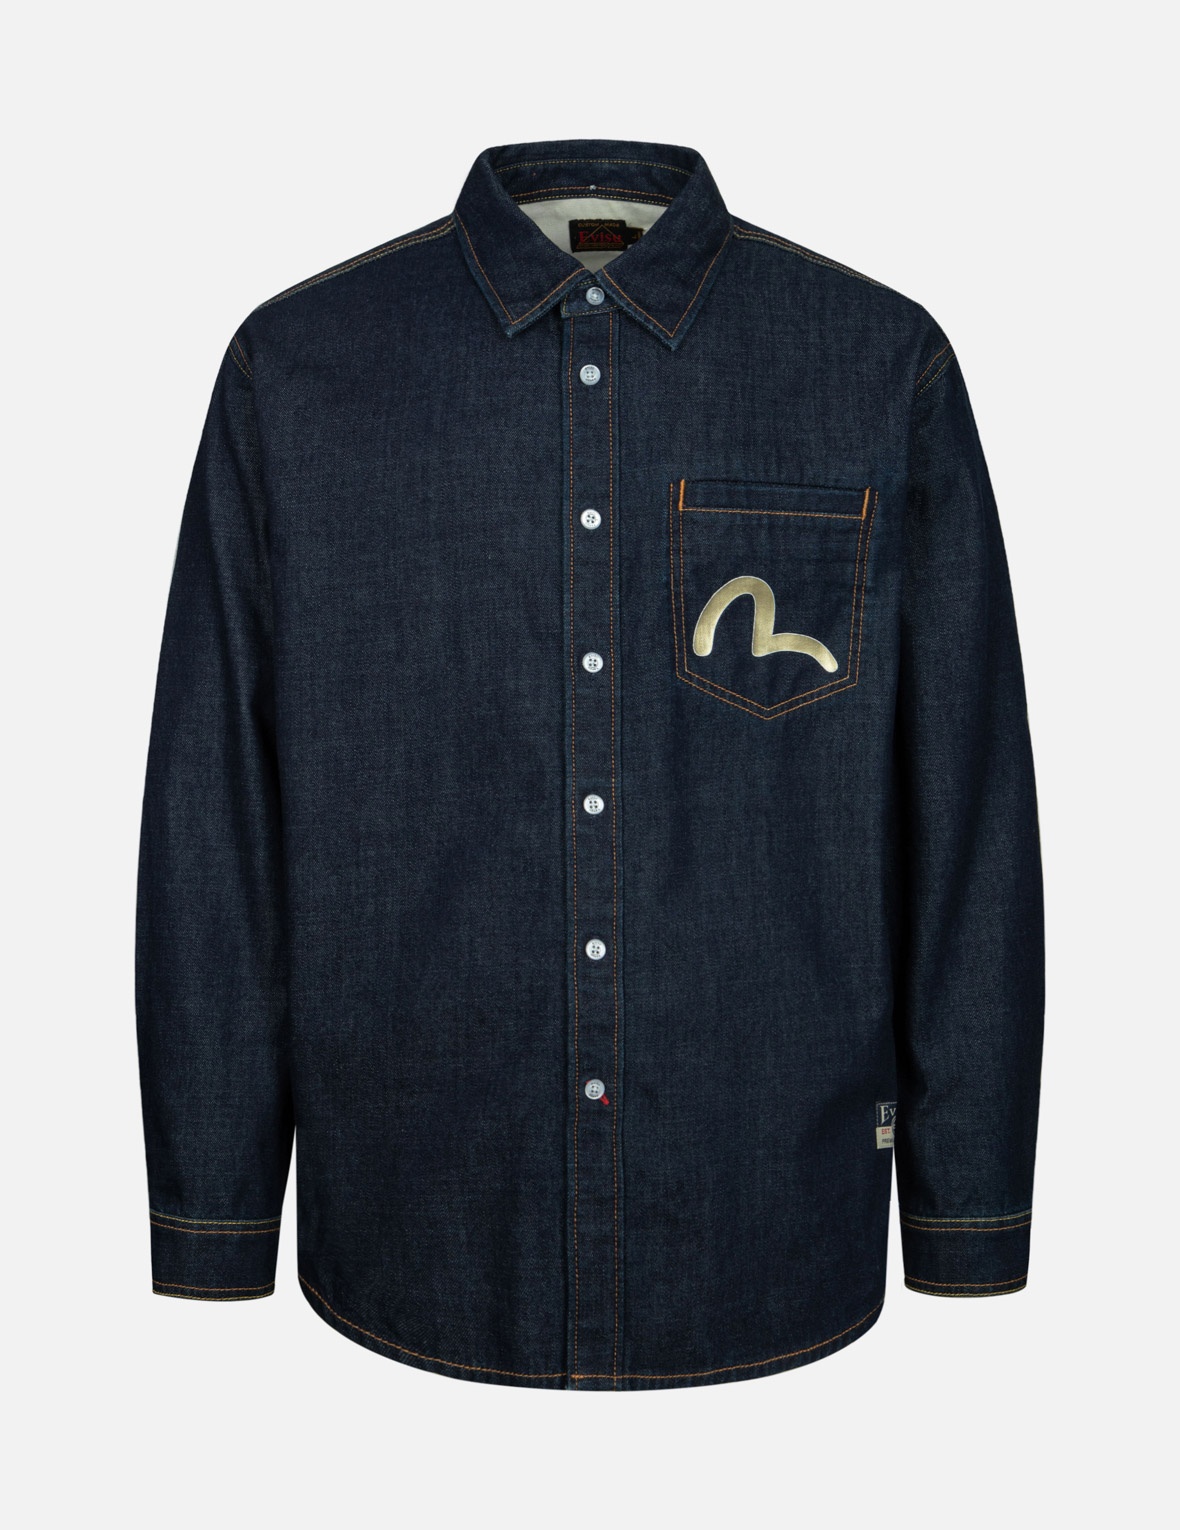 KAMON STITCHING AND THE GREAT WAVE DAICOCK PRINT RELAX FIT DENIM SHIRT - 2